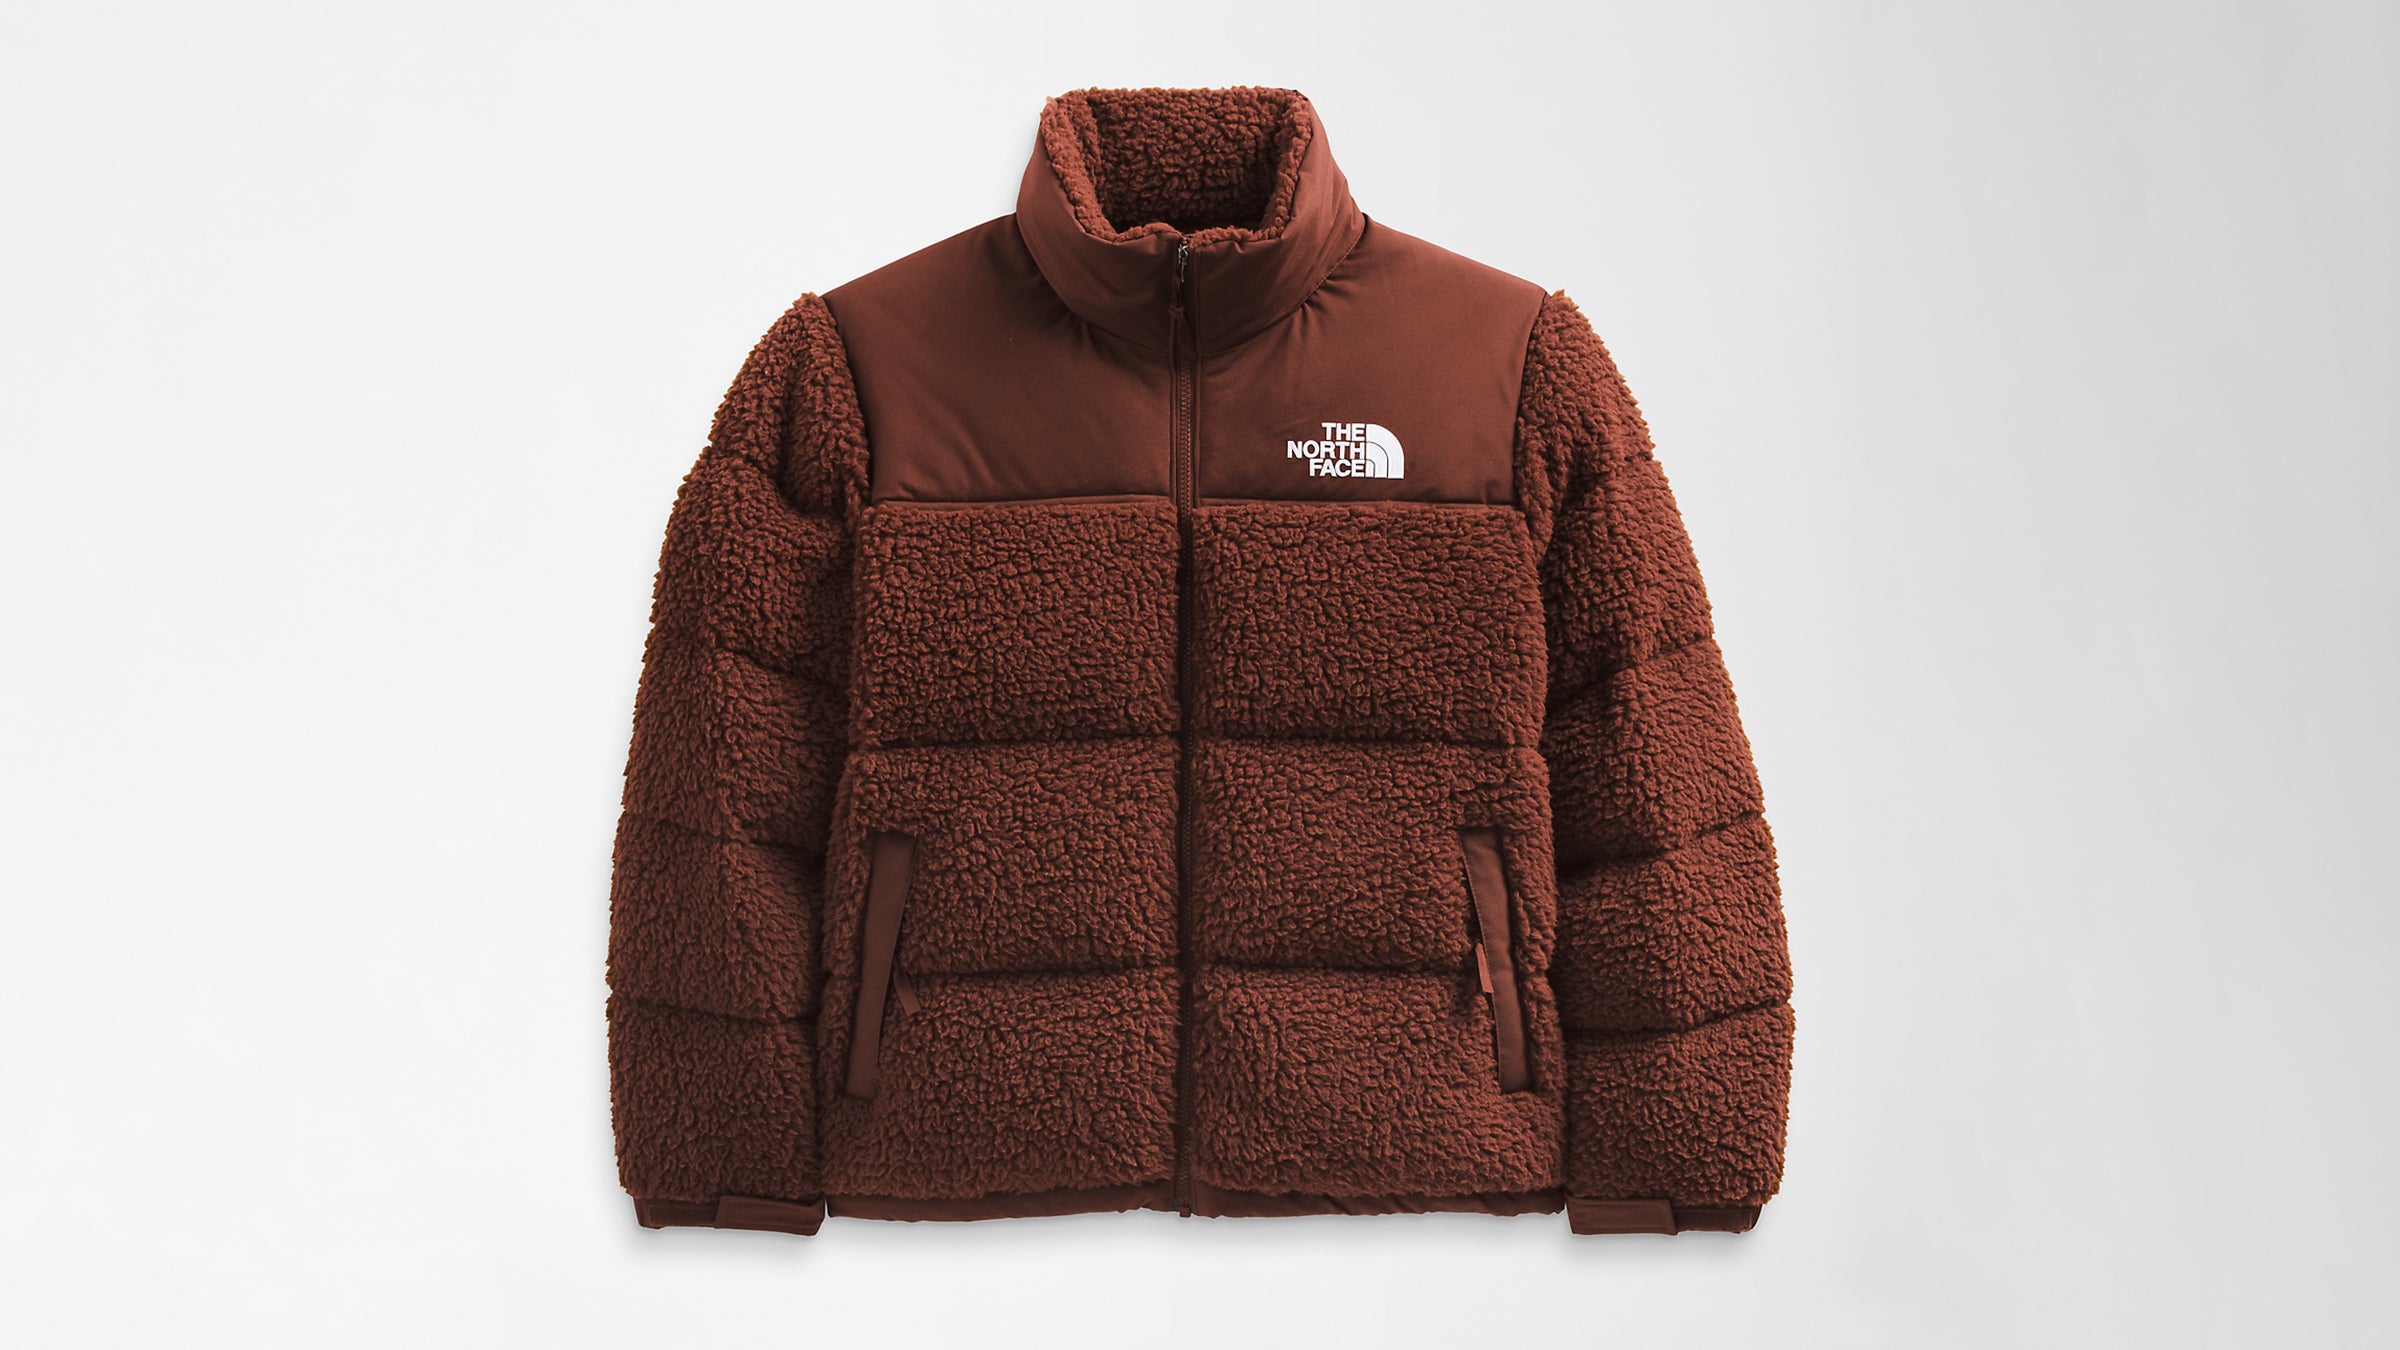 The North Face Is Renaming Its “Sherpa” Fleece - Outside Online